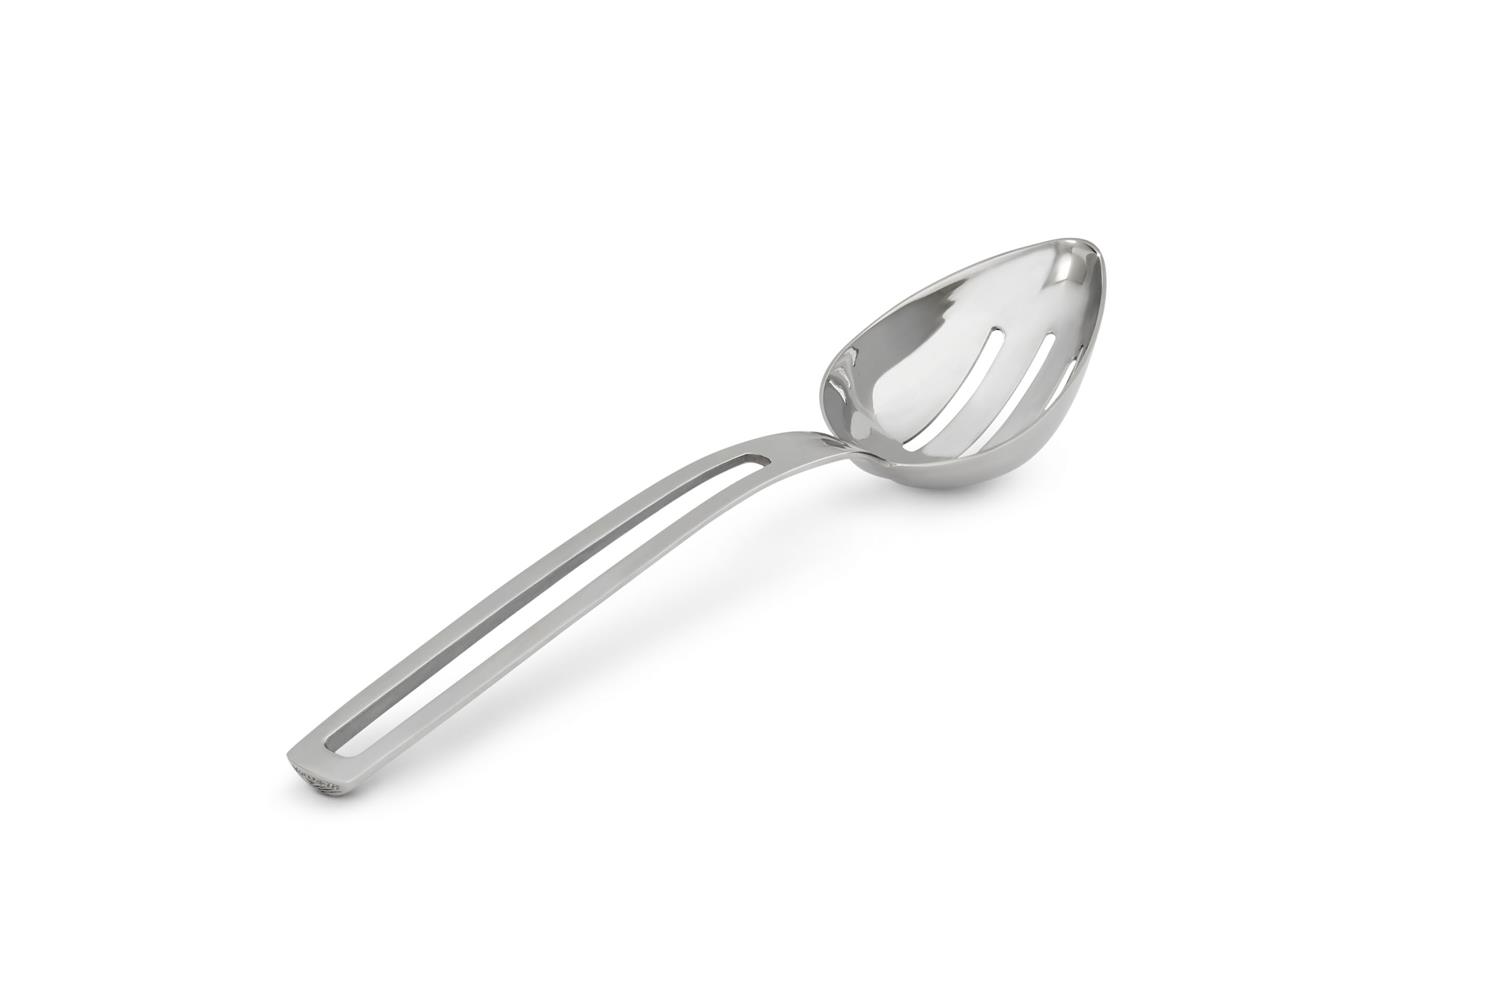 Vollrath 46728 Oval Serving Spoon, Slotted Bowl,